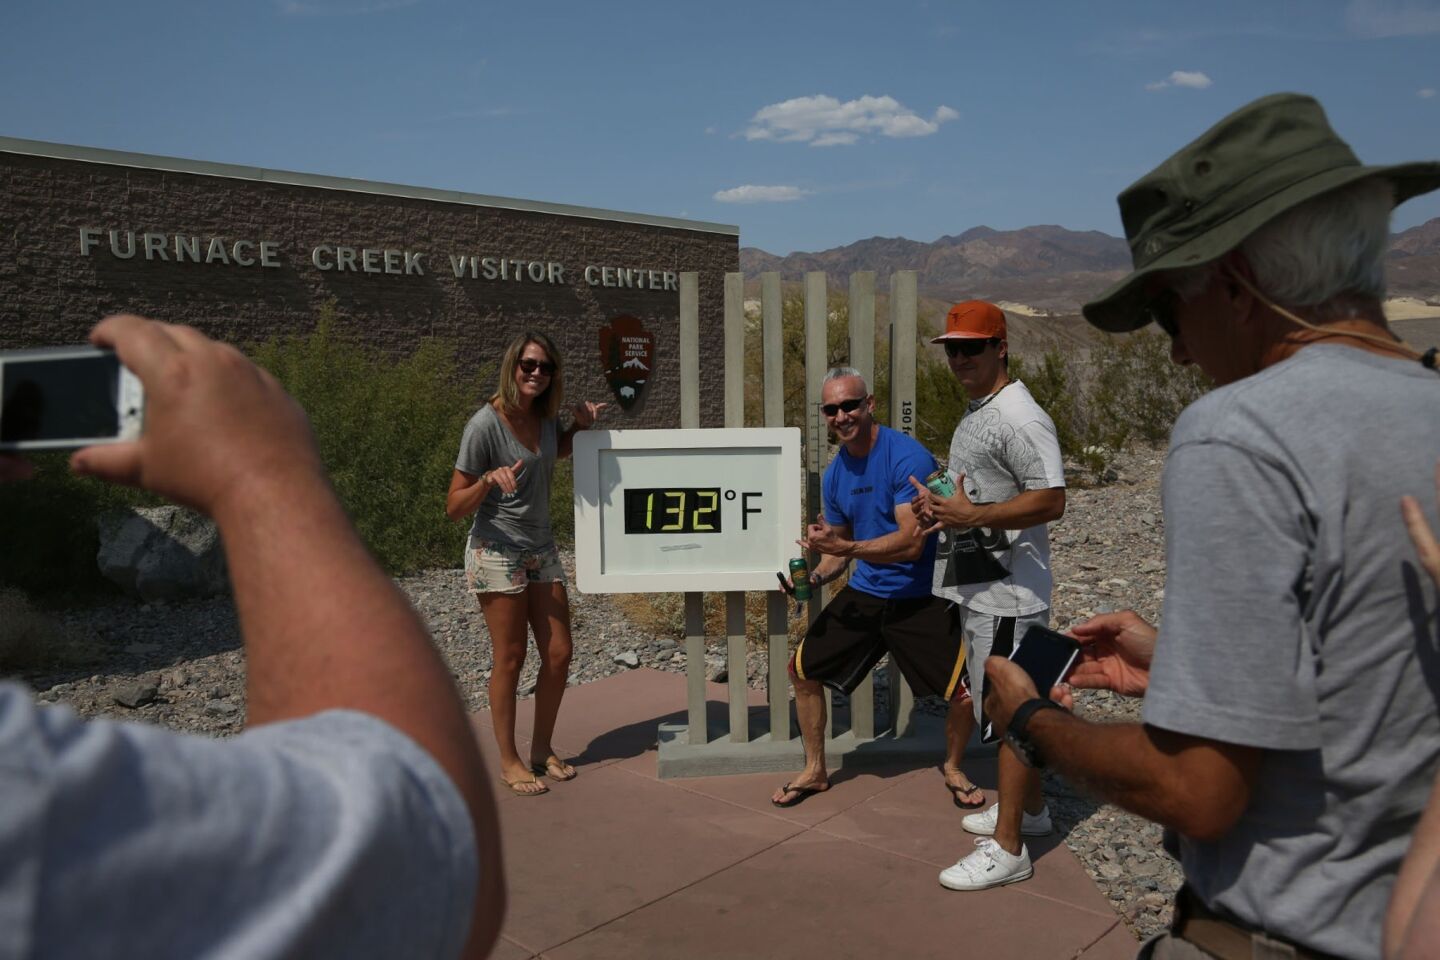 Sarah Mason, left, and Lance Lindsey, both from Los Angeles, and Joey Teixeira of Honolulu have their picture taken with of a thermometer -- showing 132 degrees -- at the Furnace Creek Visitor Center in Death Valley.